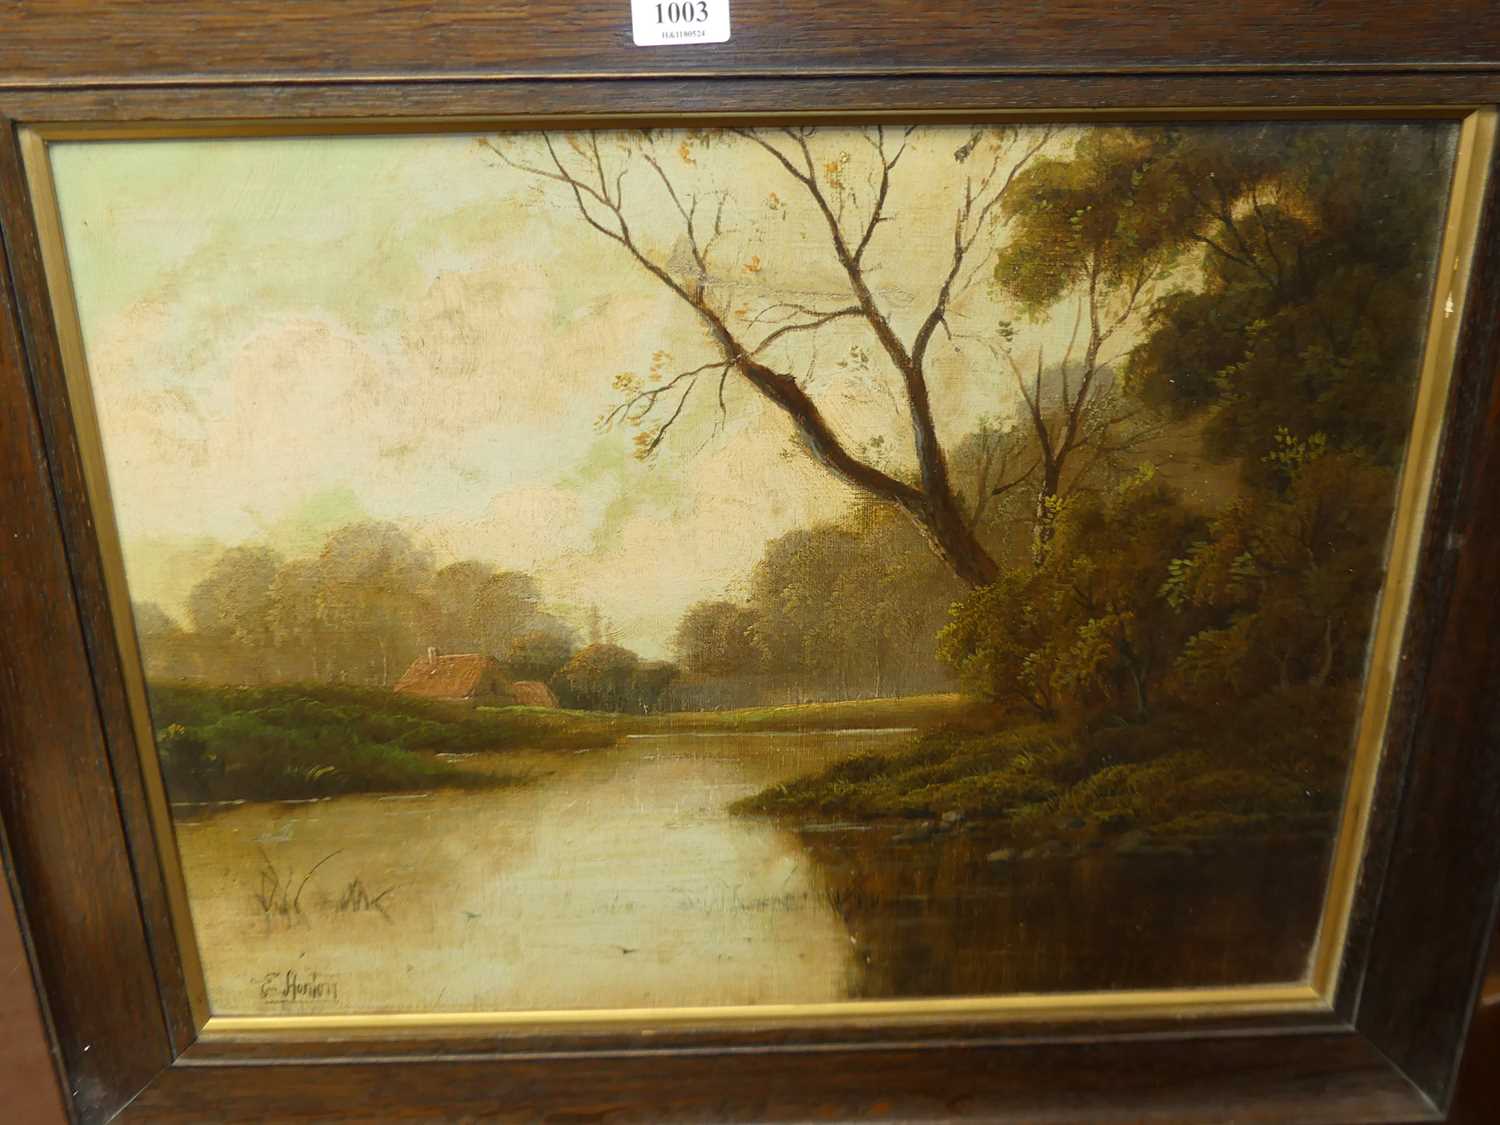 Early 20th century English school, river landscape, oil on canvas, indistinctly signed lower left, - Image 2 of 3